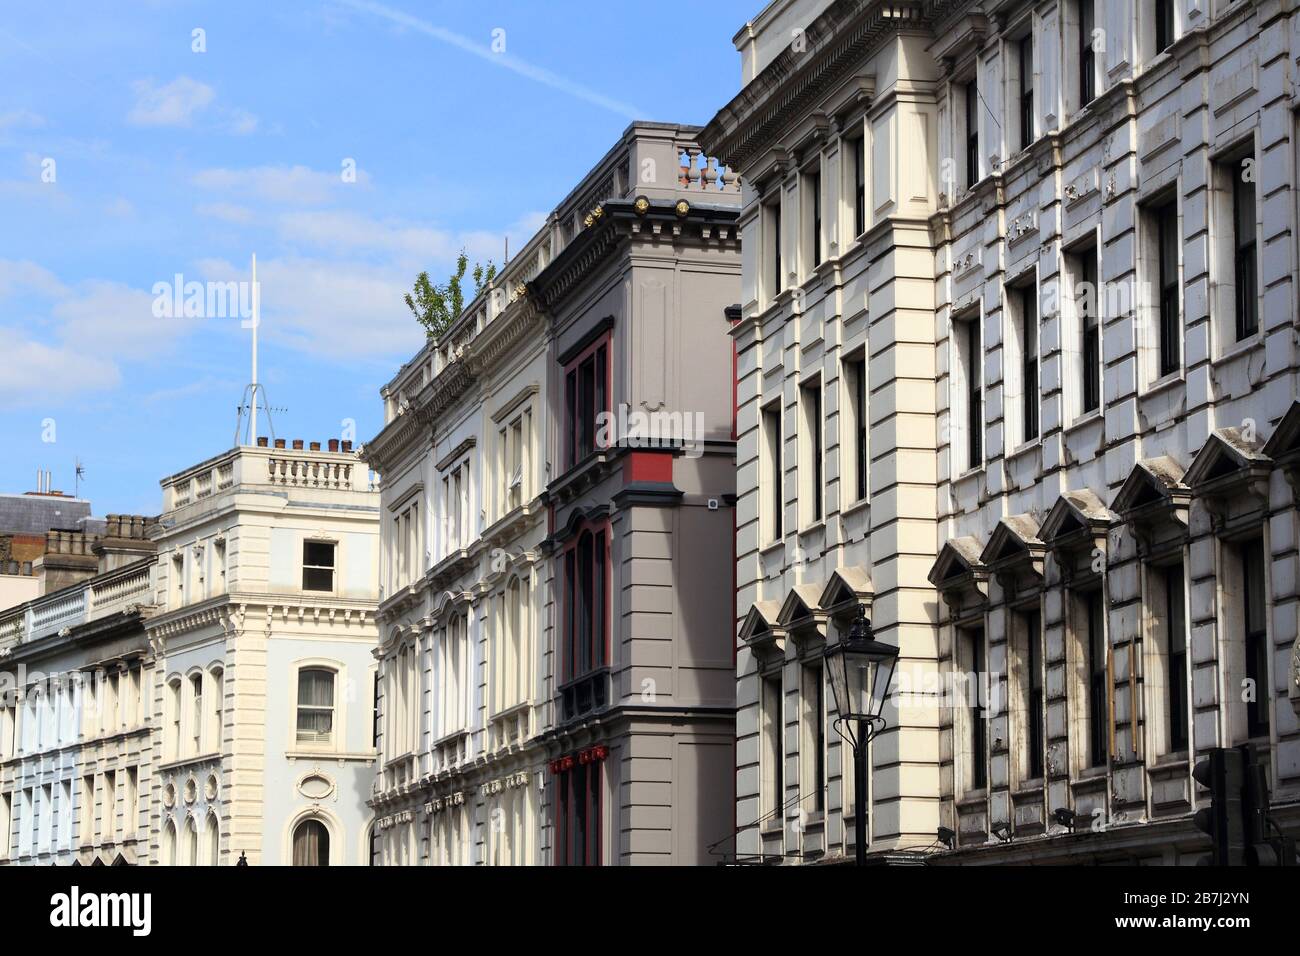 Architecture of West End, London, United Kingdom. Great Russell Street. Stock Photo